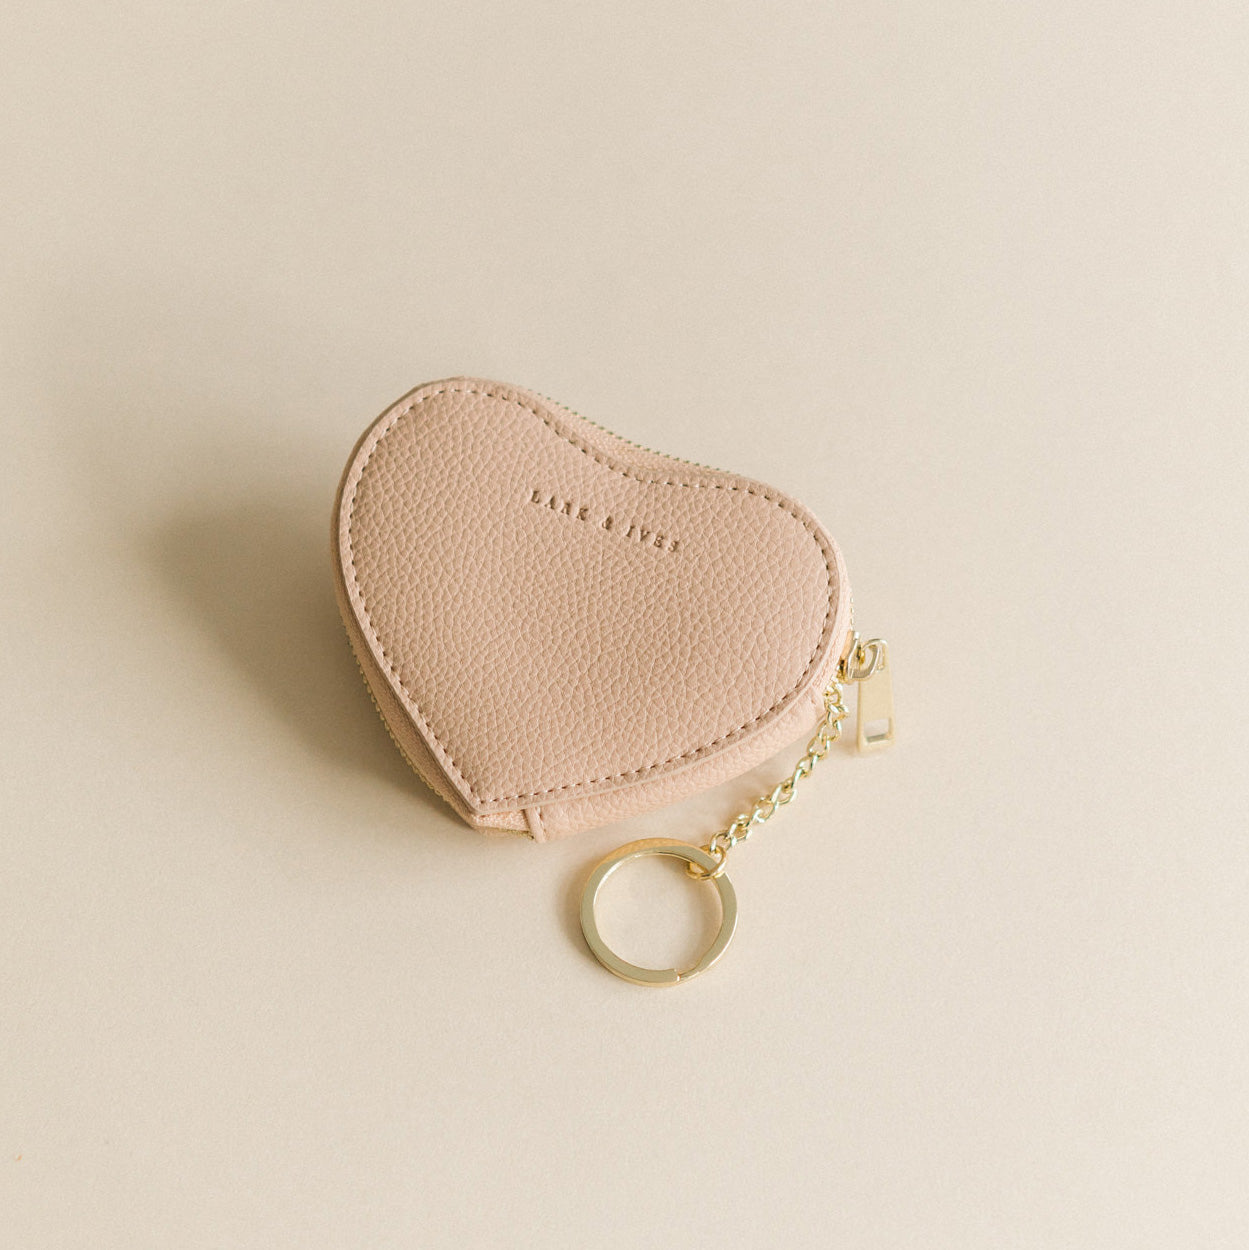 Lark and Ives / Vegan Leather Accessories / Small Accessories / Coin Purse / Heart shaped / Coin Pouch / Mini Walle / Gift Guide / Gift Ideas / Bridesmaid Gifts / Nude Pink